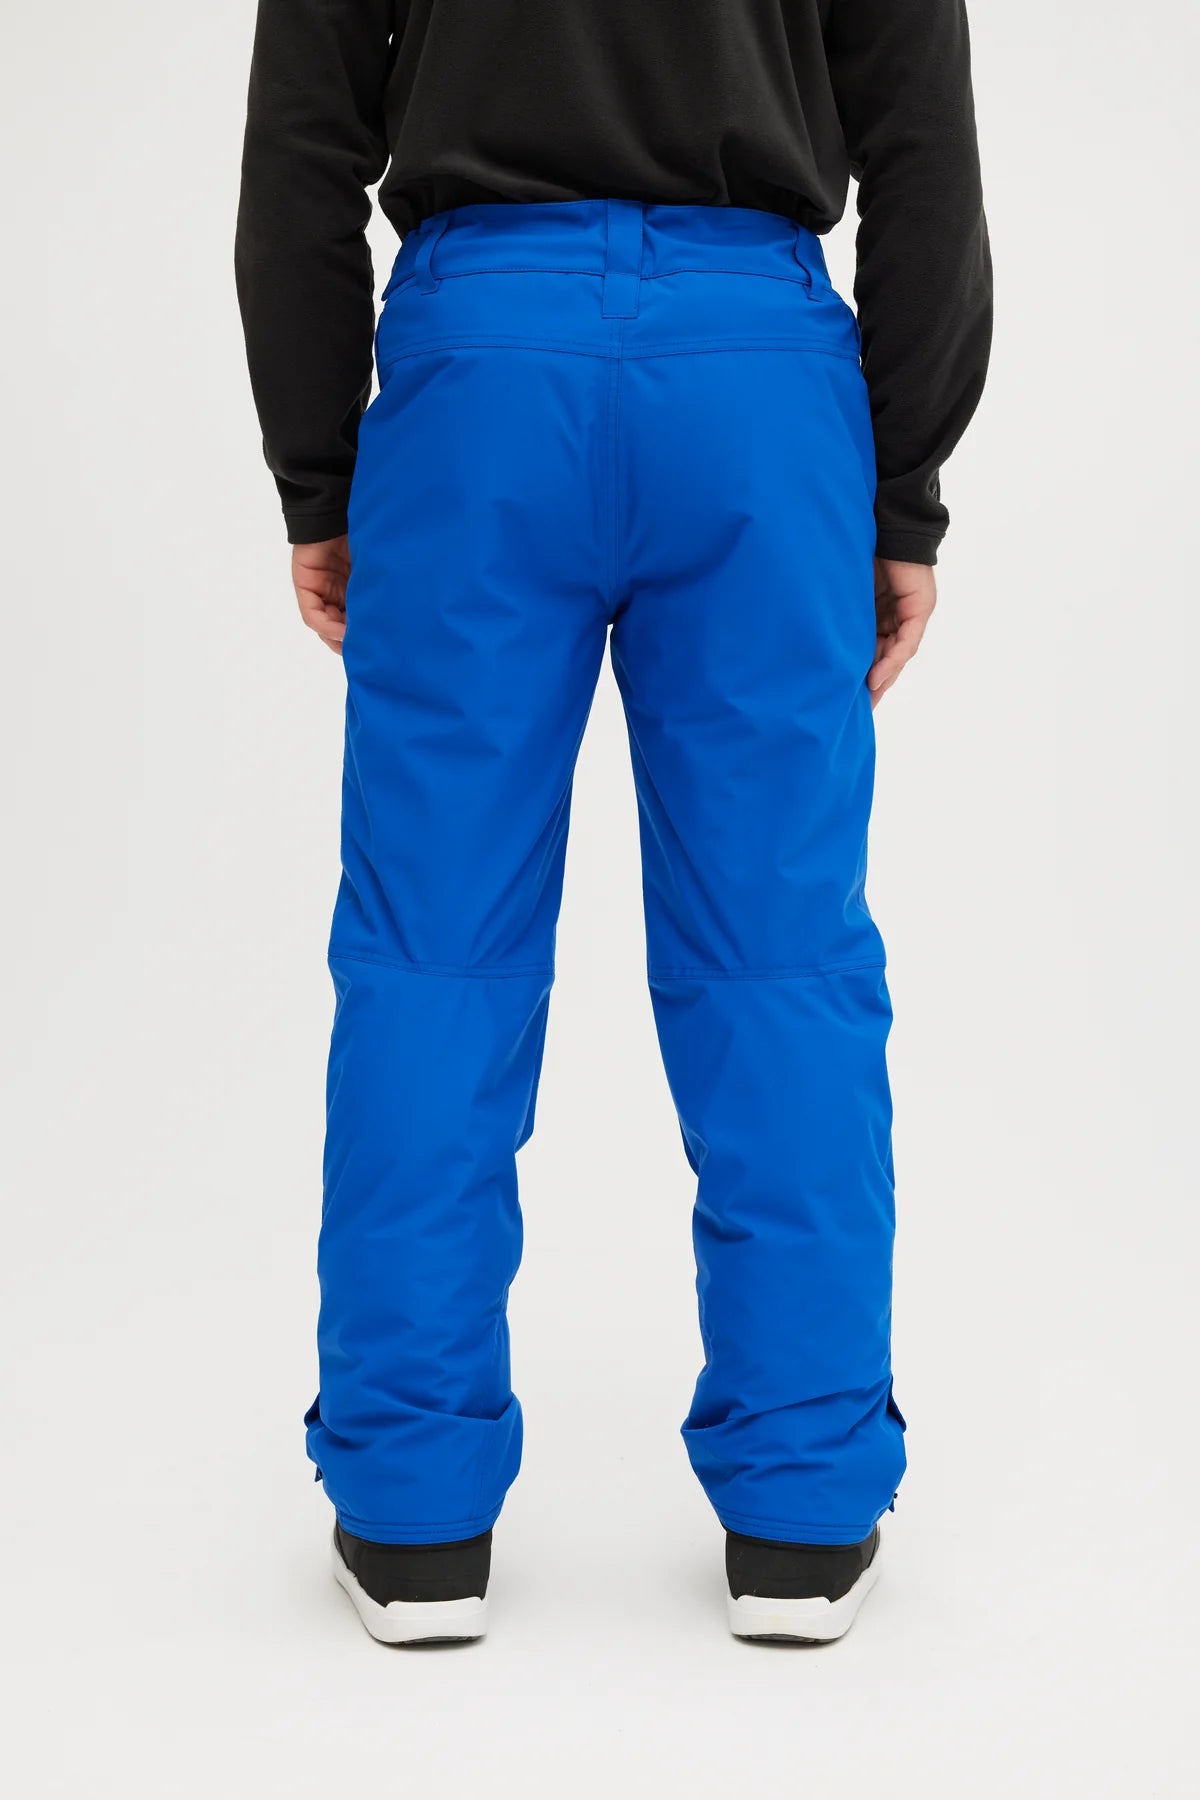 O'Neill Hammer Insulated Men'S Ski Snowboard Pants – Sports Replay